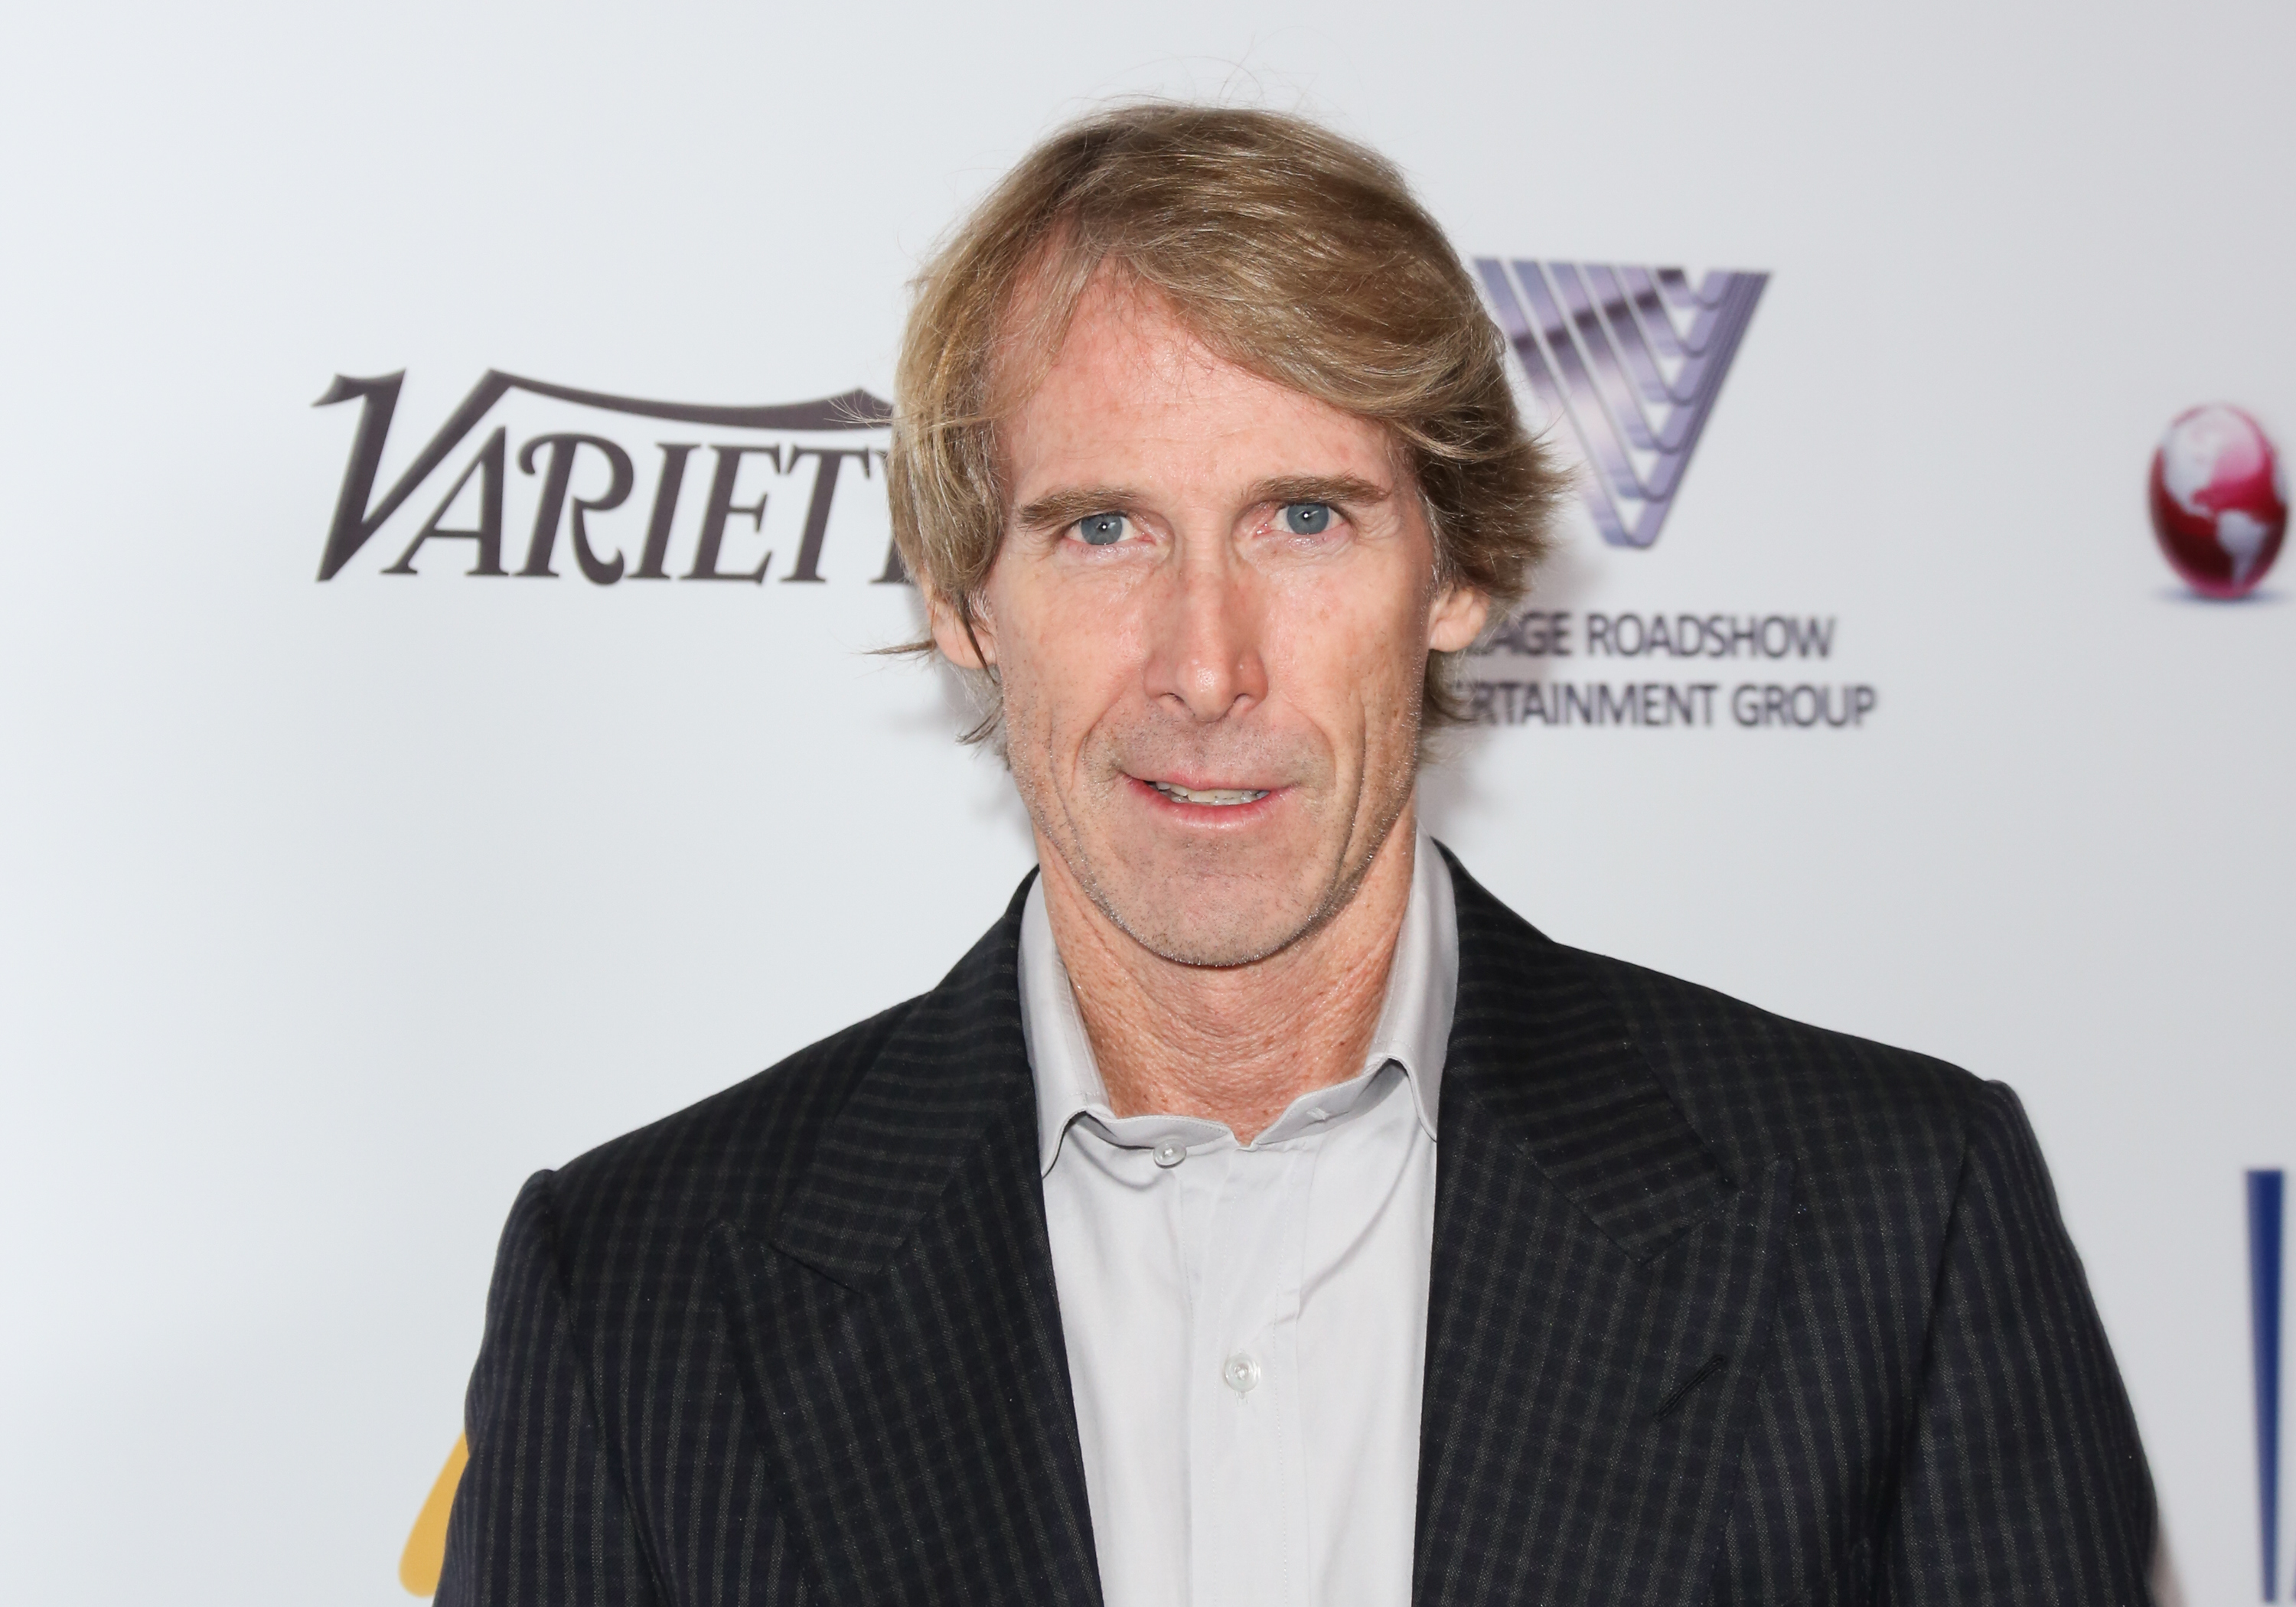 Director Michael Bay attends the 4th Annual Australians In Film Awards, Benefit Dinner and Gala at The InterContinental Hotel on October 25, 2015 in Century City, California. (Paul Archuleta&mdash;FilmMagic)